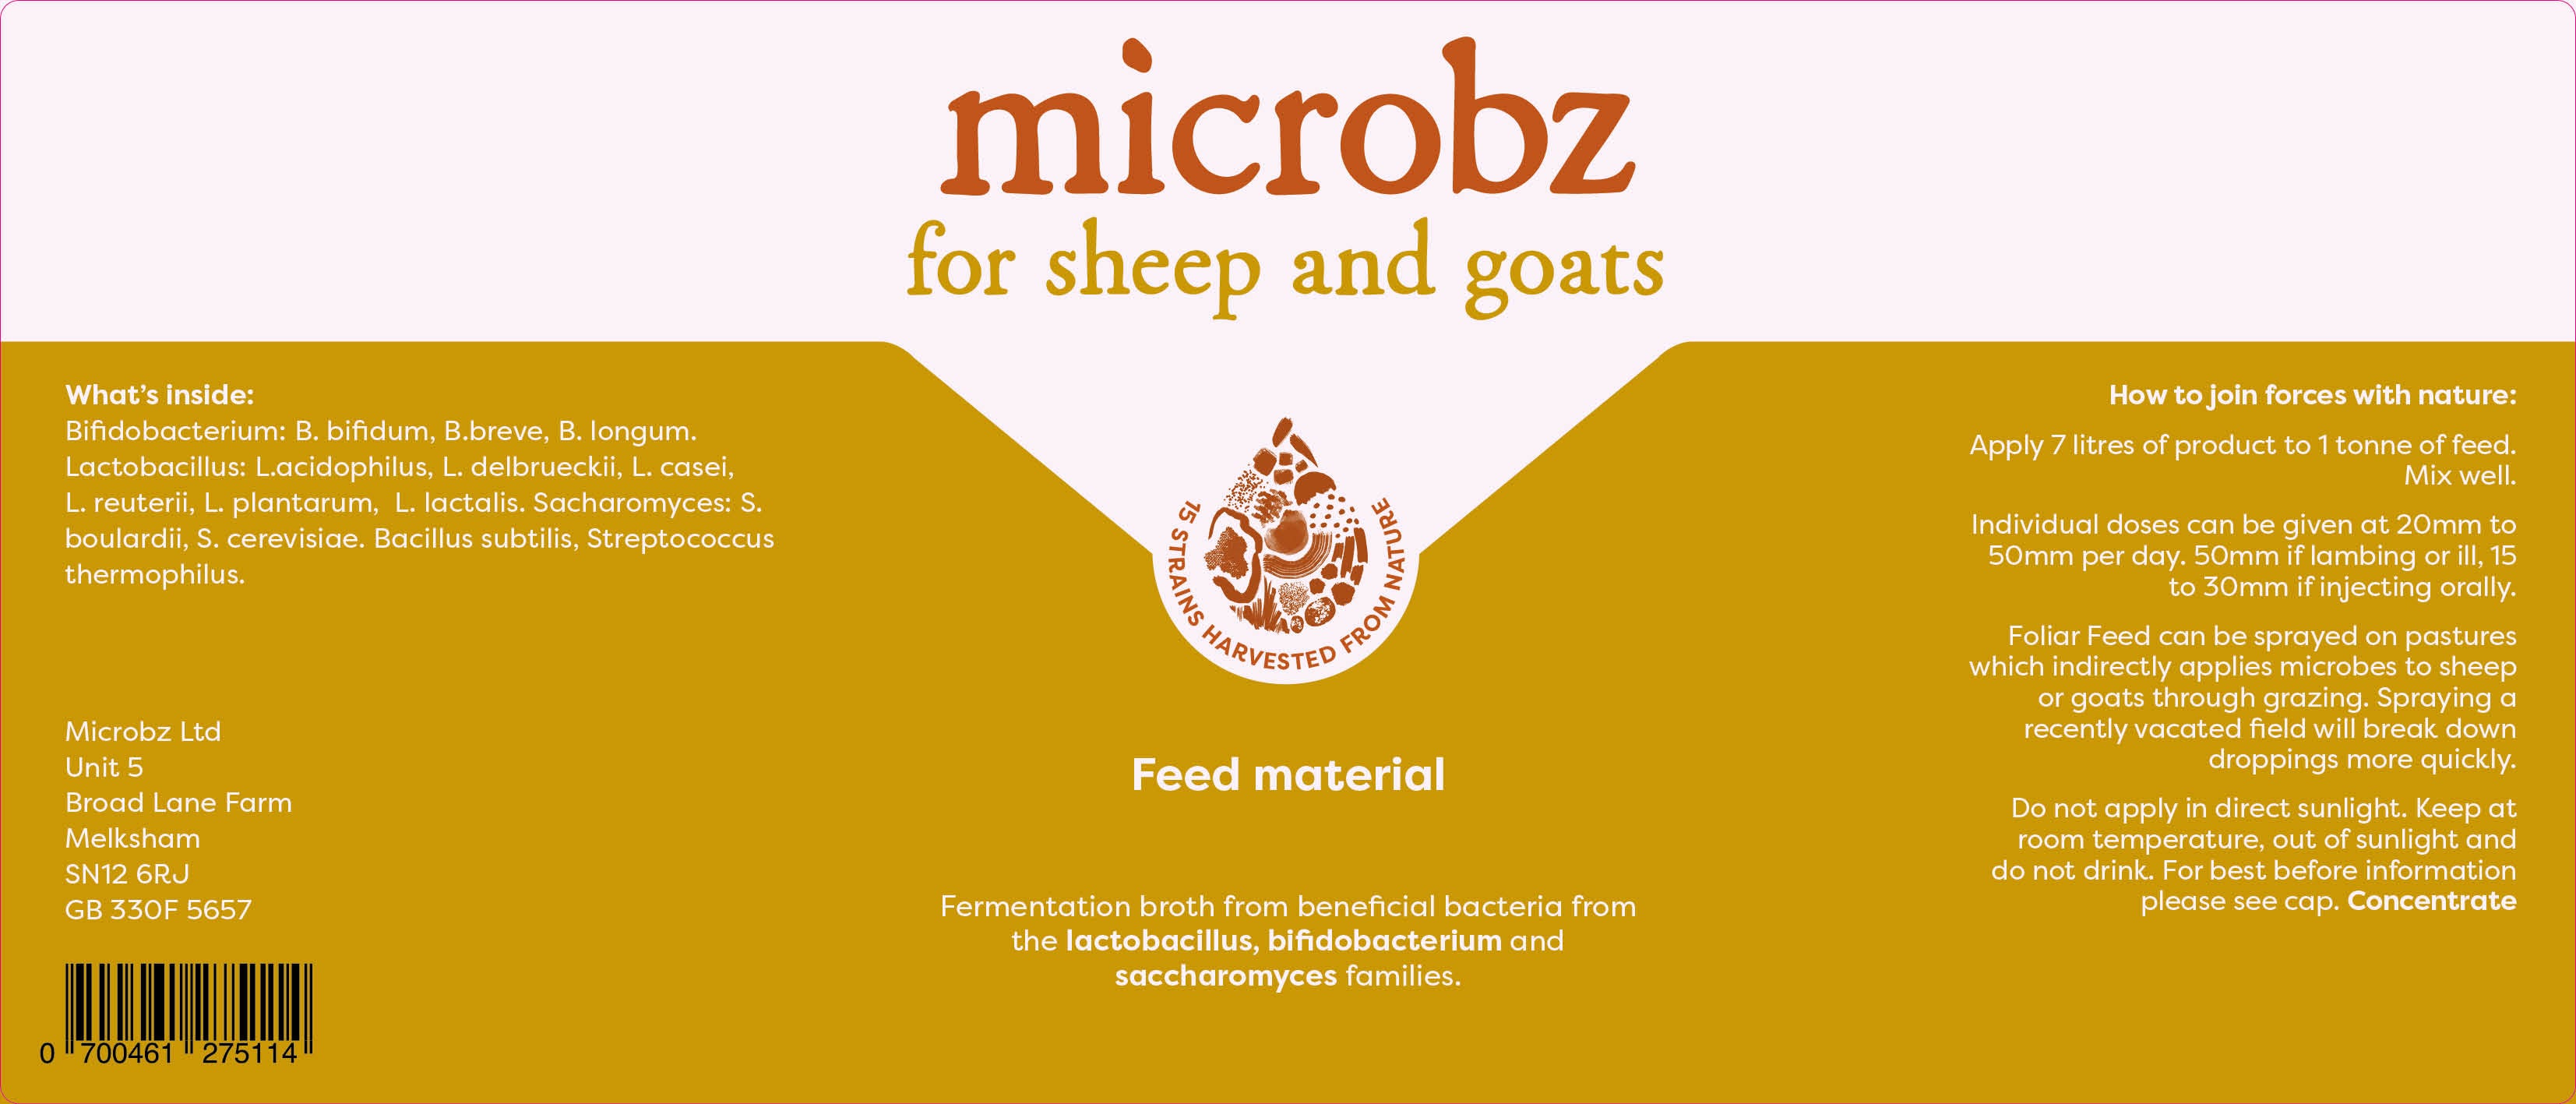 microbz for sheep and goats label